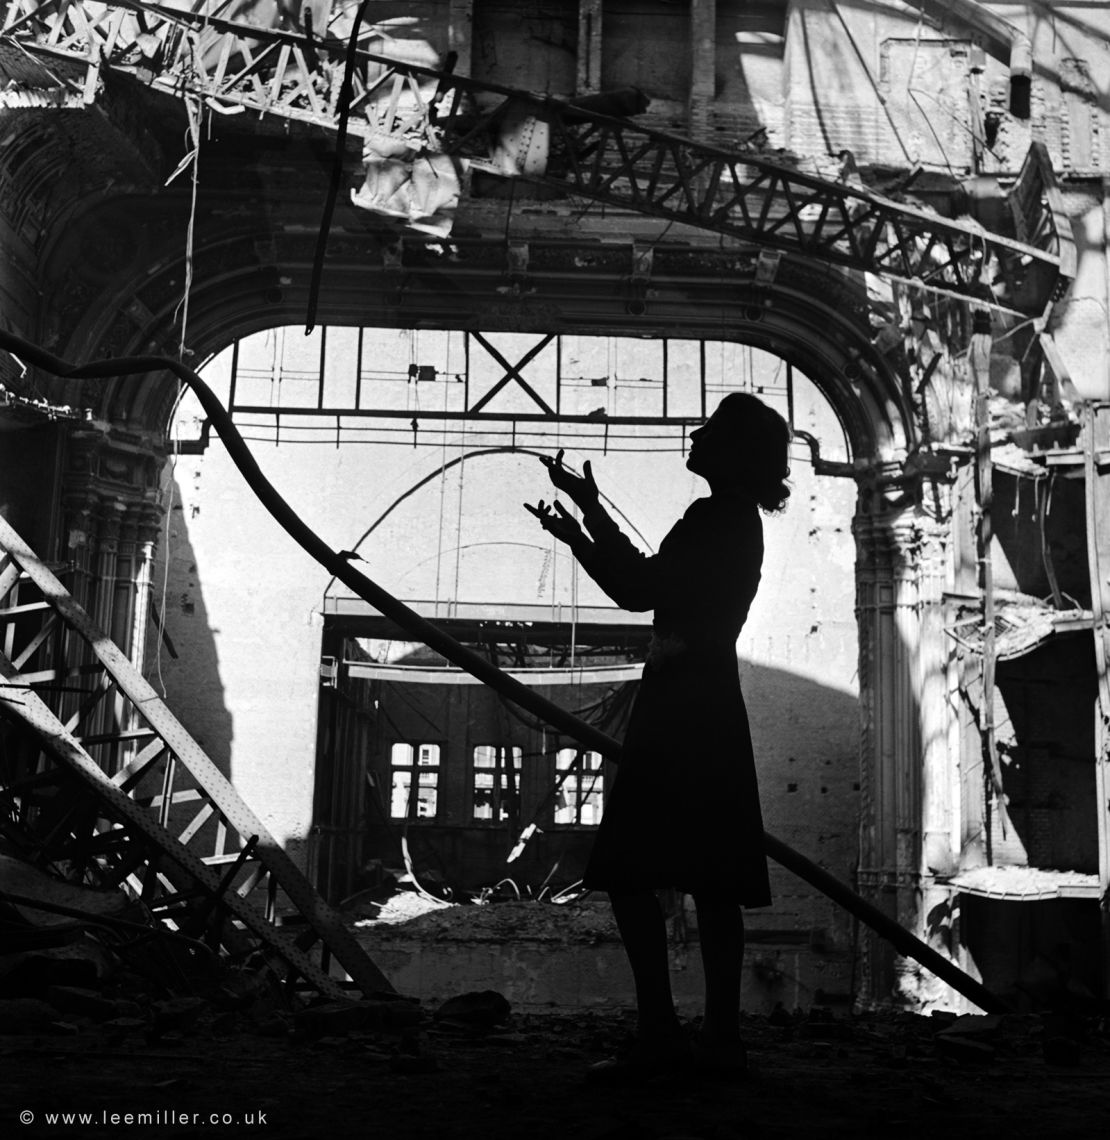 Opera singer Irmgard Seefried singing against the bombed-out Vienna Opera House in November 1945, published in Vogue.